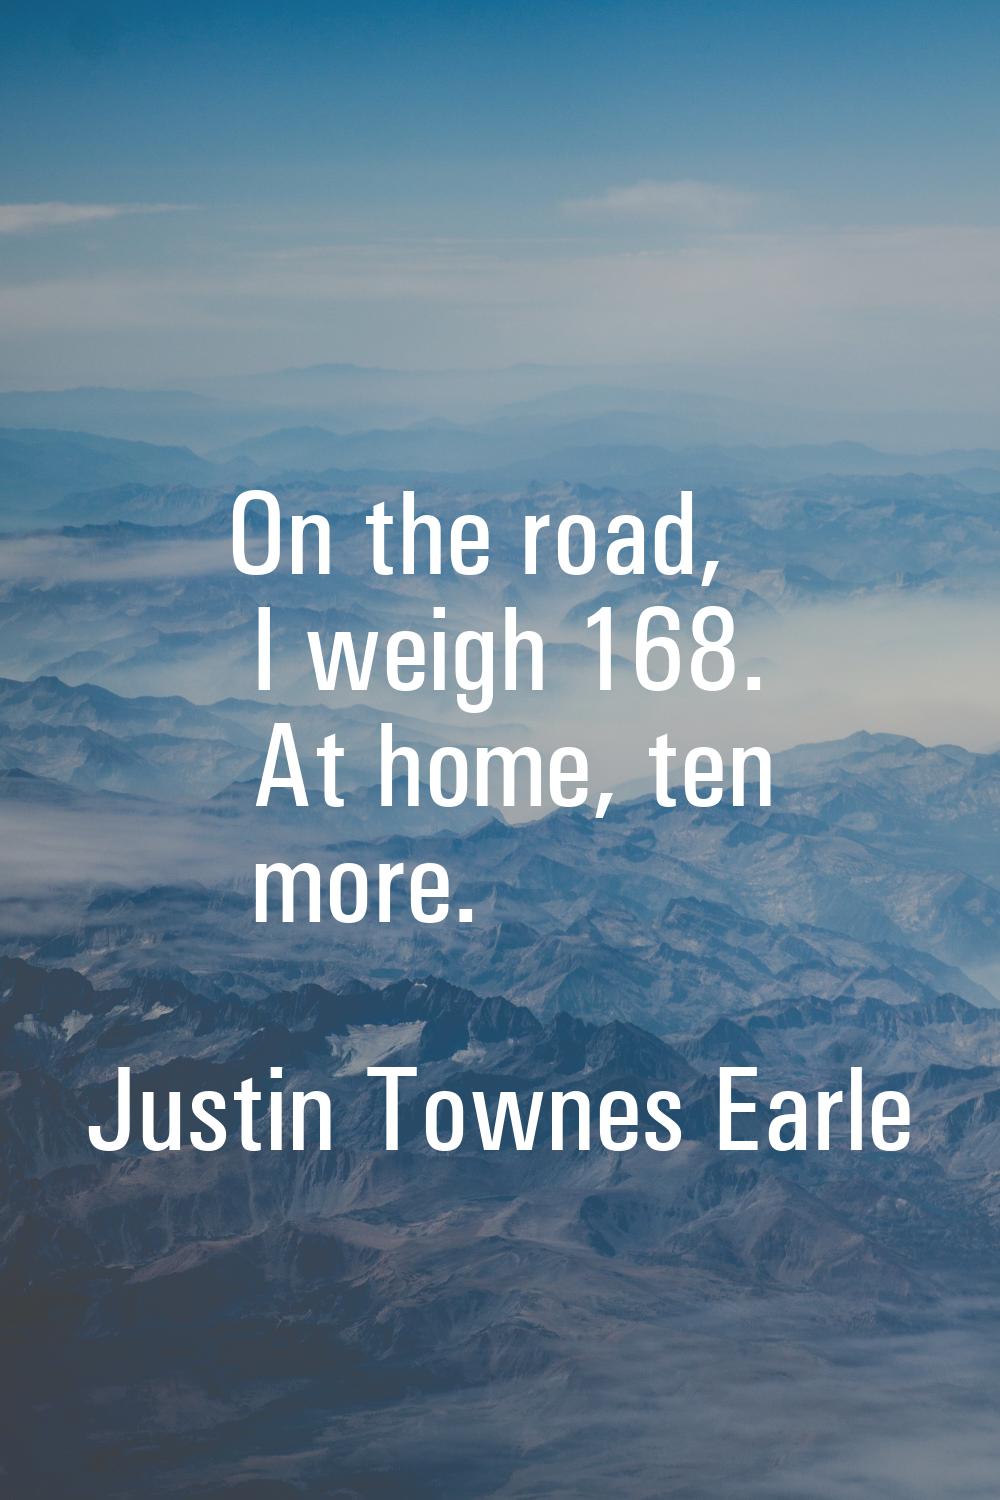 On the road, I weigh 168. At home, ten more.